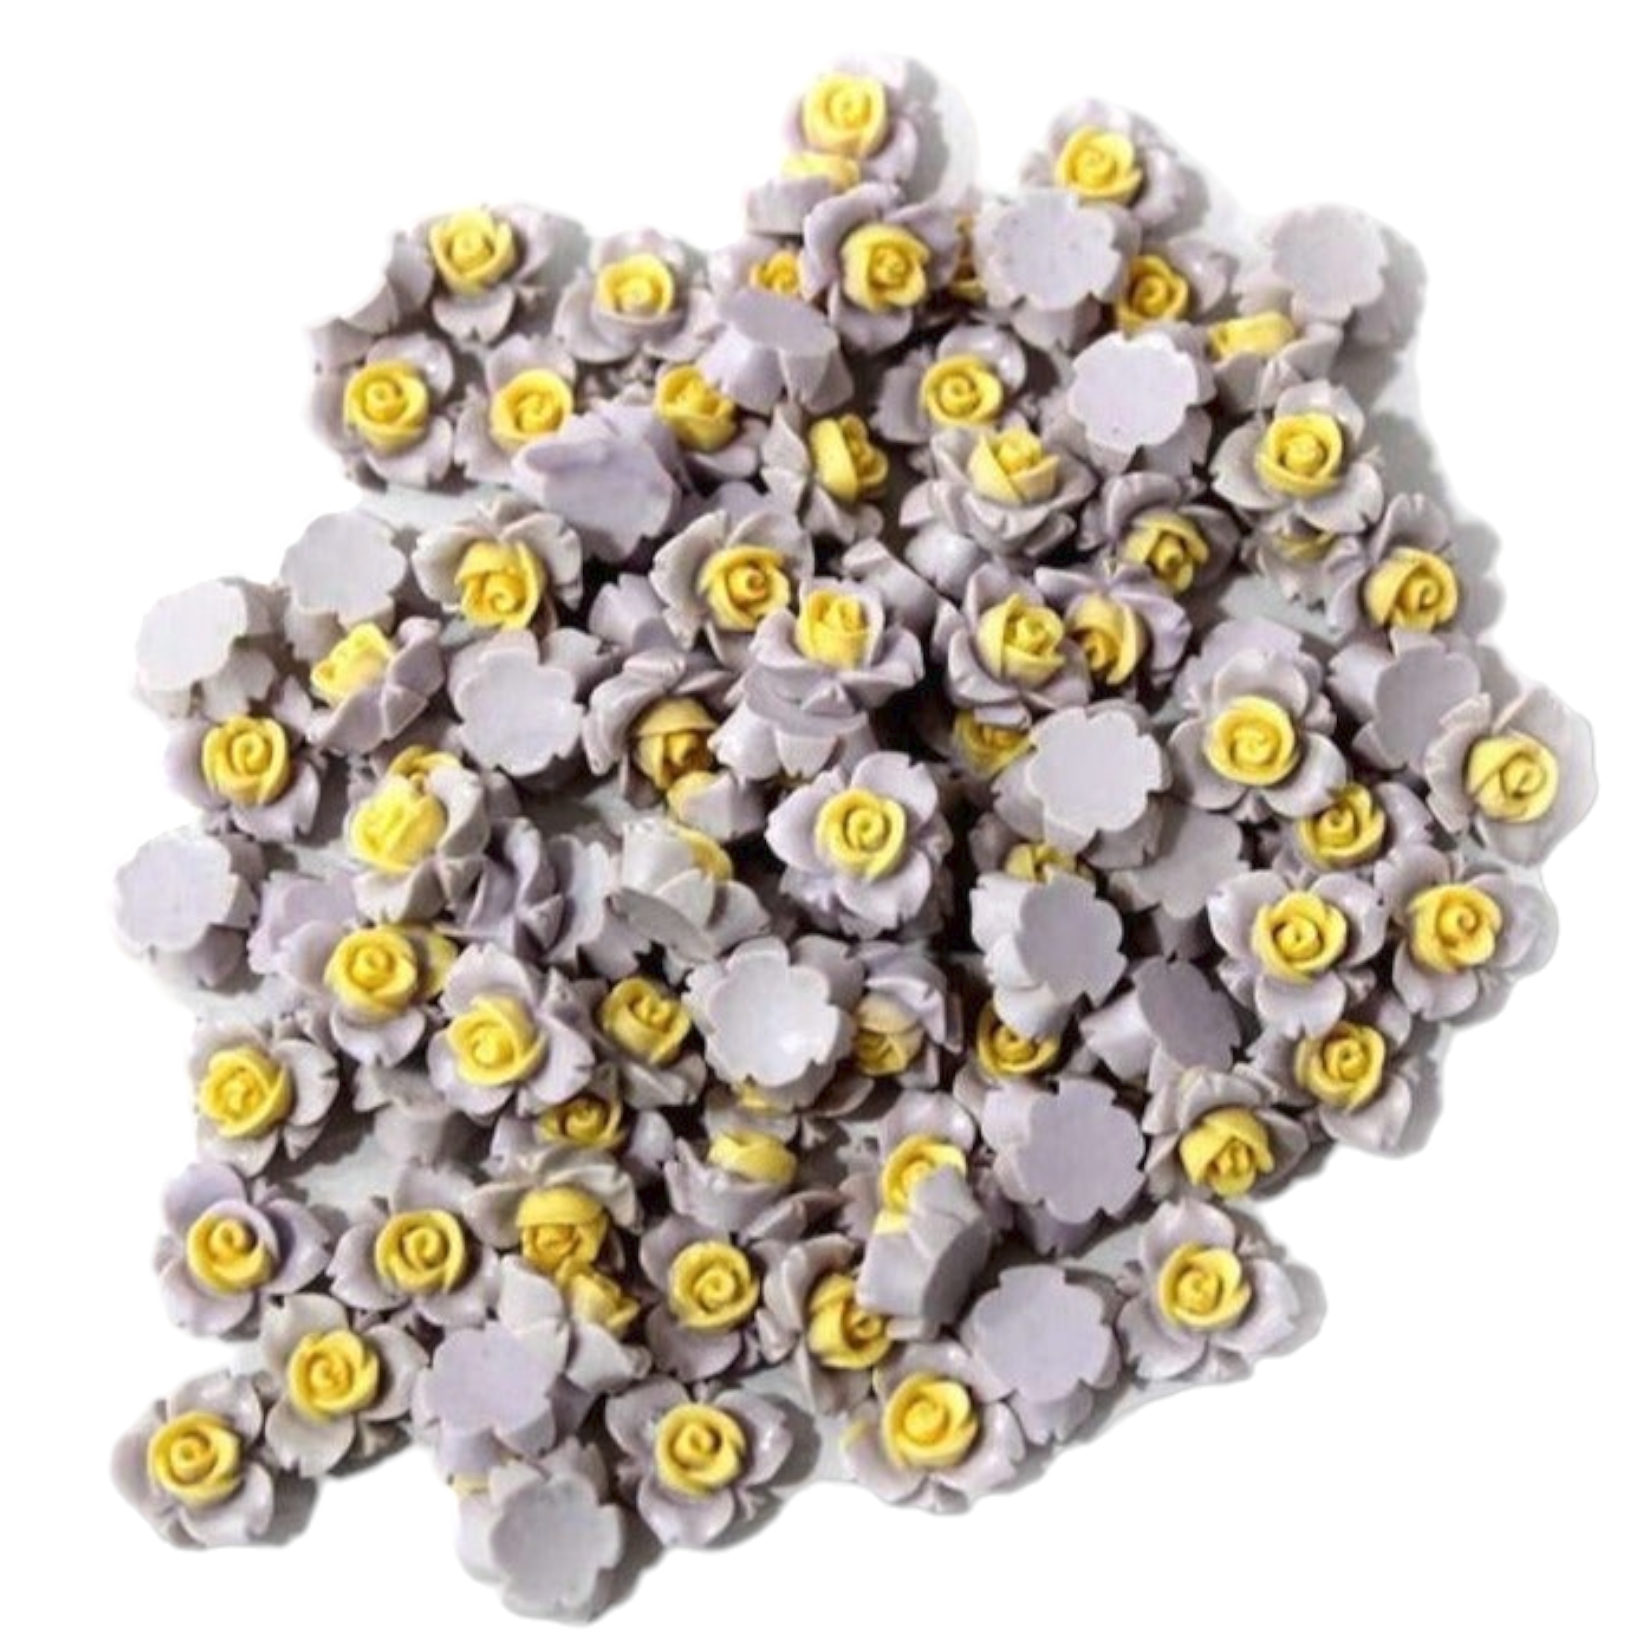 Light-weight Resin Ceramic Paan Flower Motif for Craft Trousseau Packing Decoration - 11588